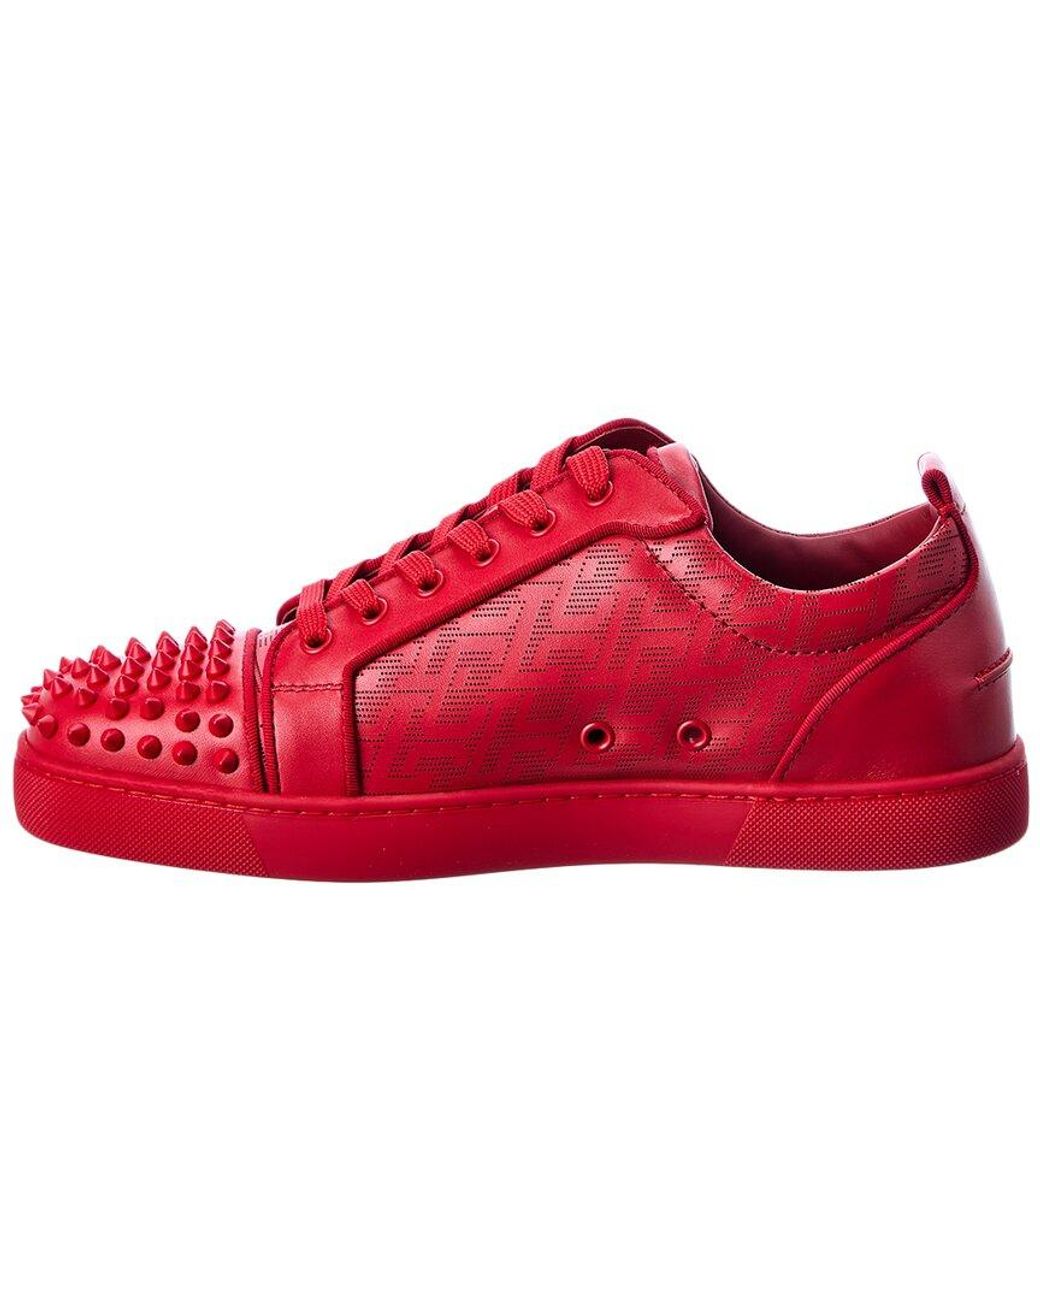 Christian Louboutin Louis Junior Spikes - Red Suede